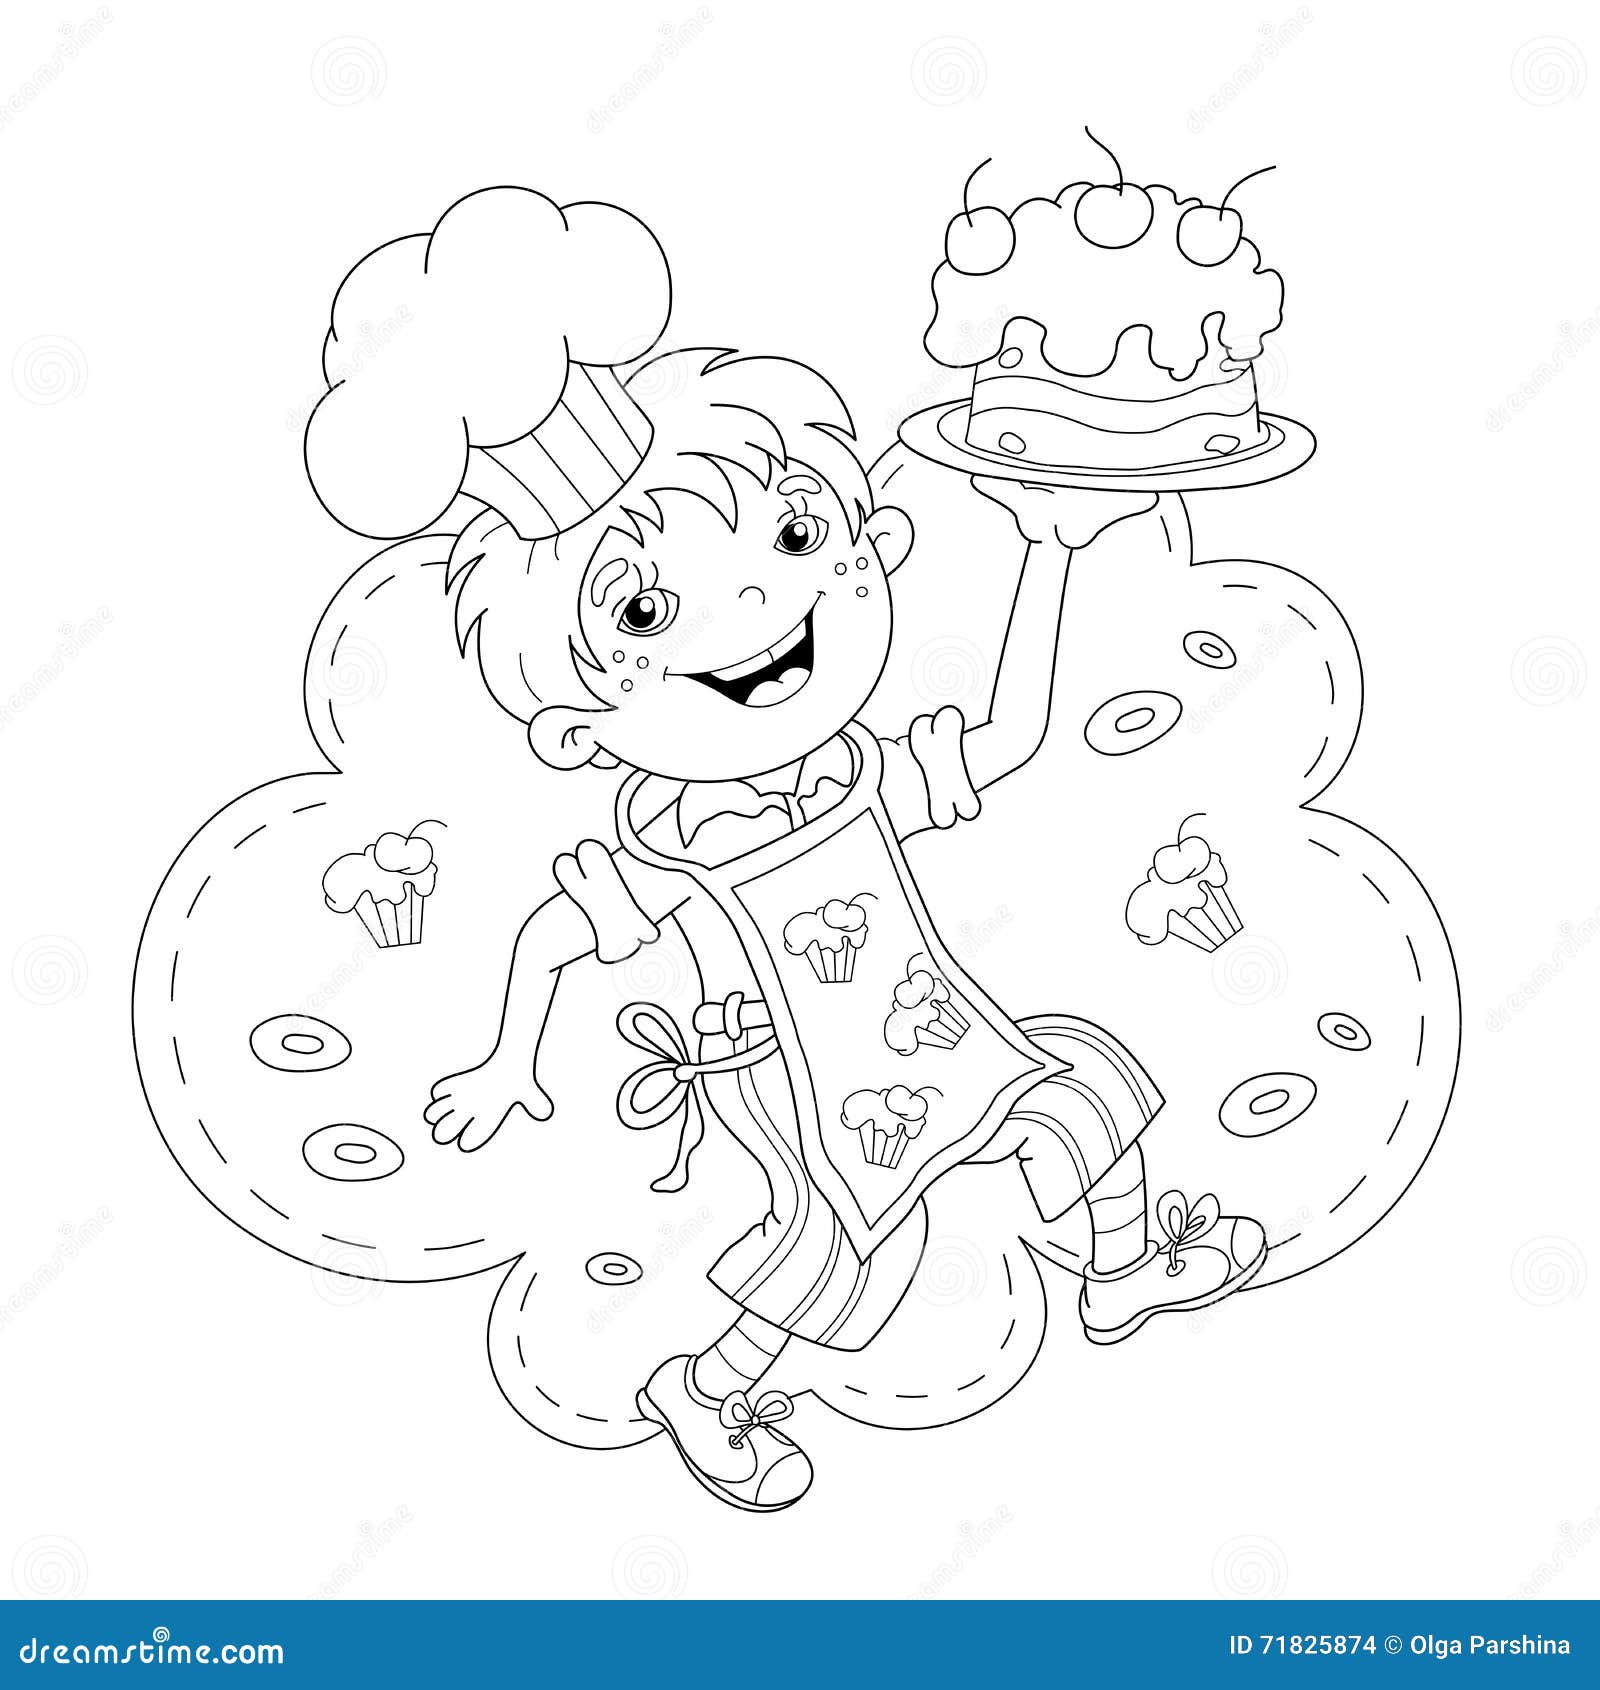 Coloring Page Outline Of Cartoon Boy Chef With Cake Stock Vector - Illustration of dish, cartoon ...